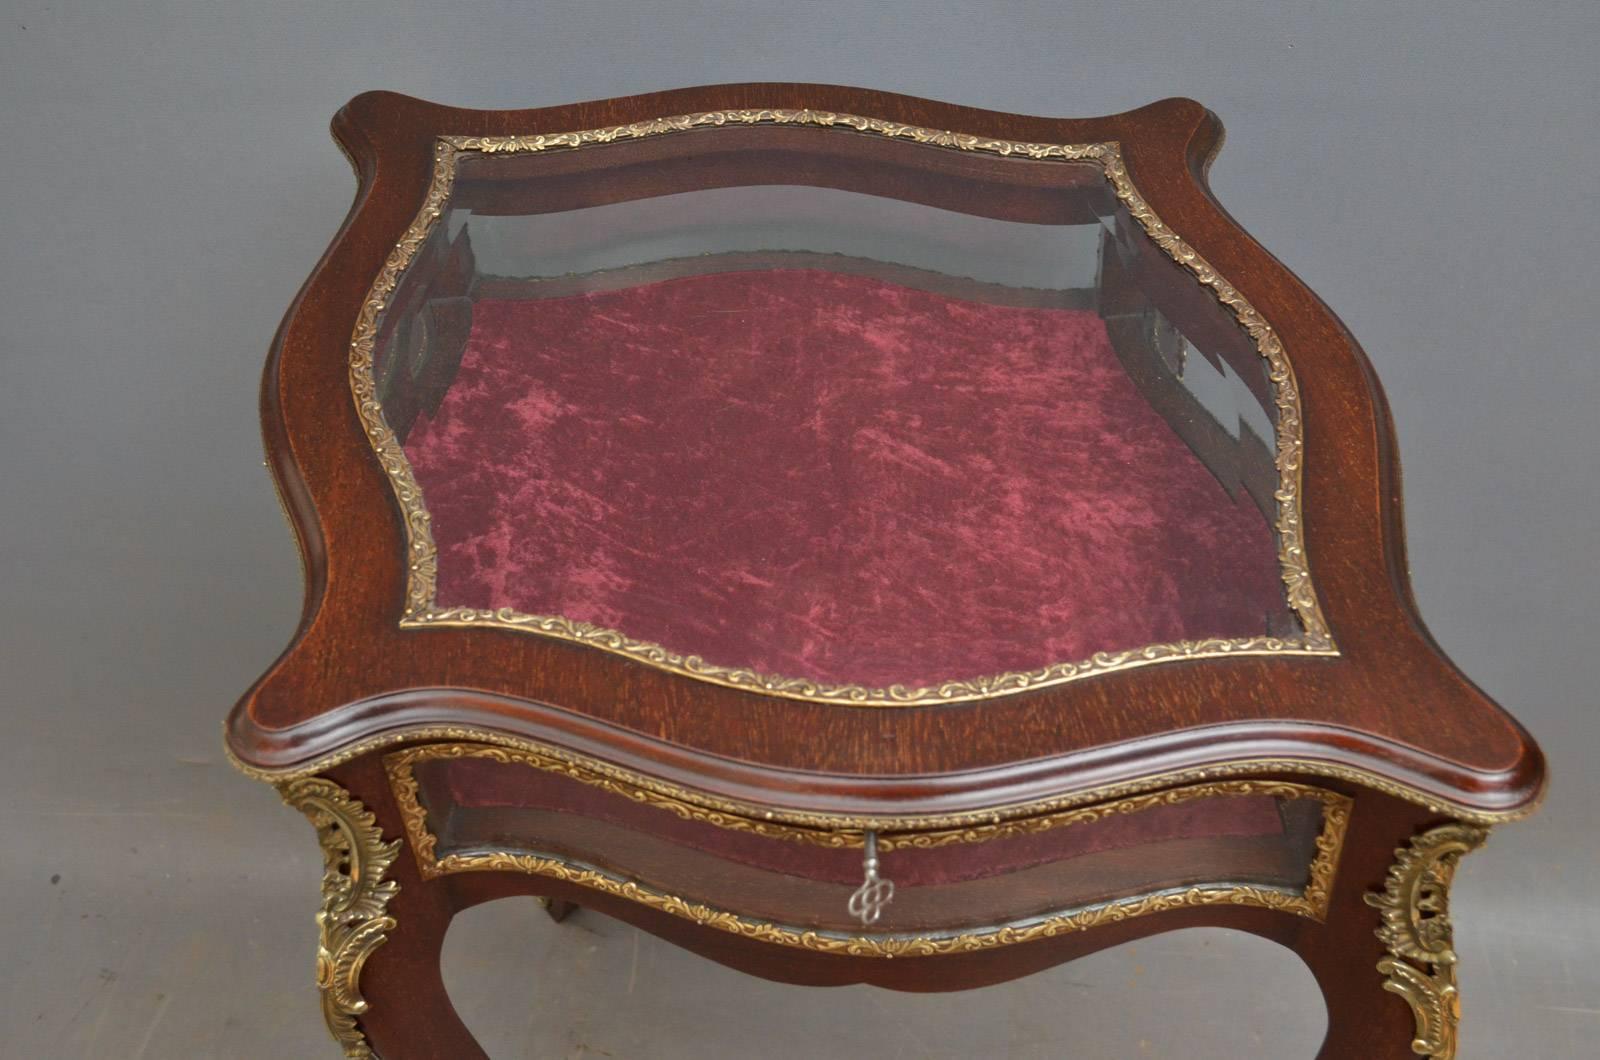 Sn4248 Edwardian mahogany display table of shaped outline, having hinged lid with bevelled edge glass and original working lock enclosing crushed velvet interior, all standing on cabriole legs terminating in sabots. This antique display table is